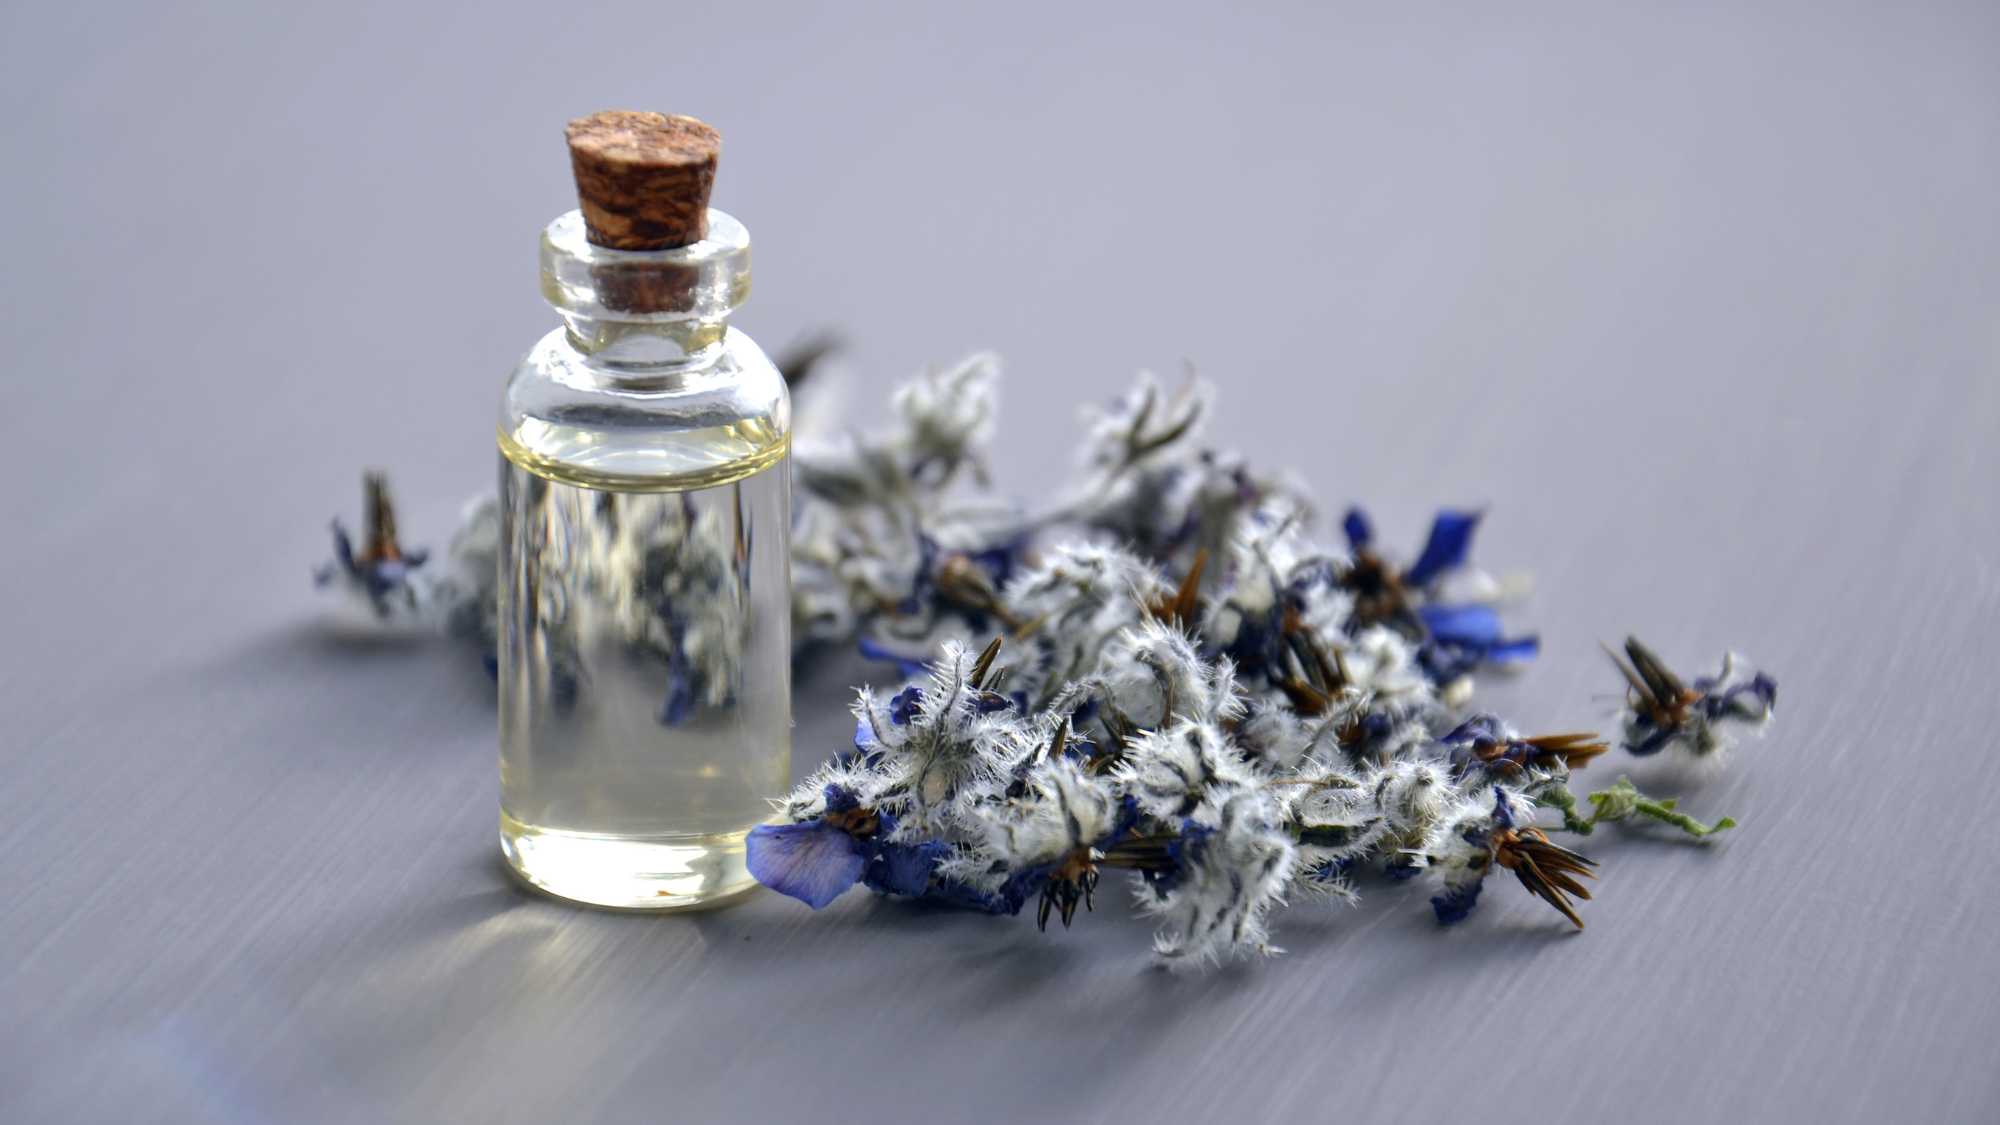 Essential Oils with skin benefits